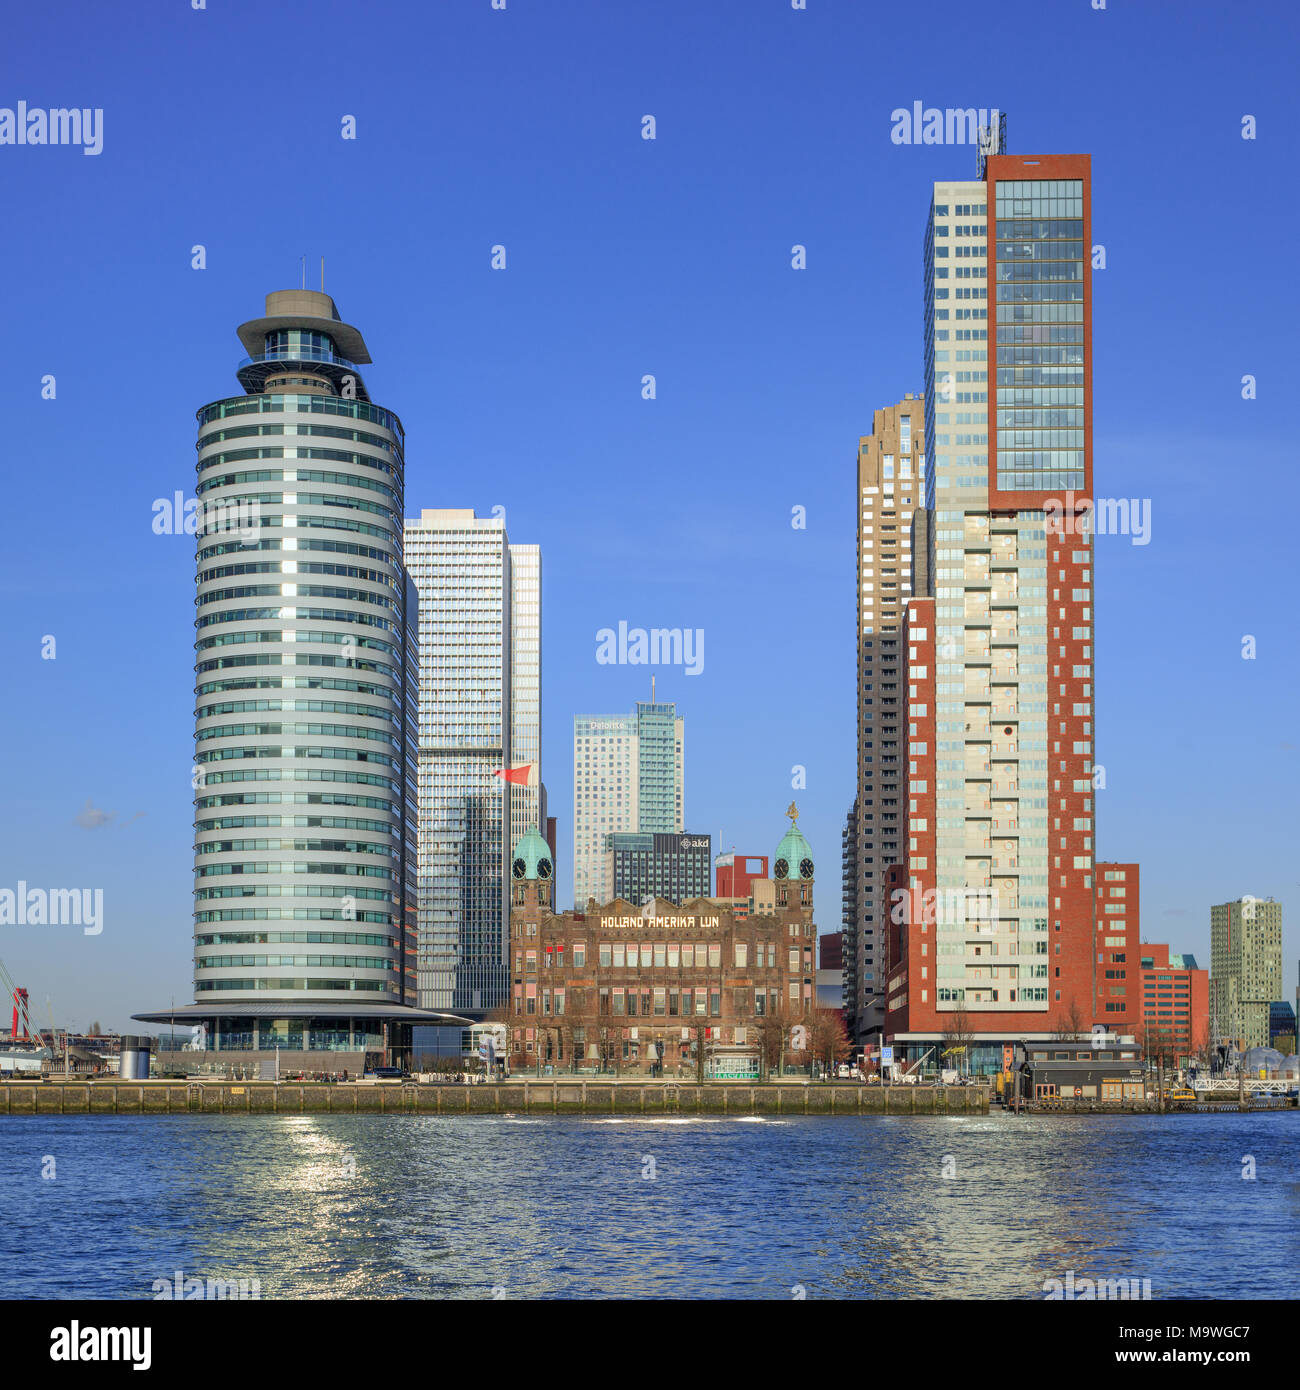 ROTTERDAM-FEBRUARY 13, 2018. Hotel New York, Montevideo tower and world Port at Kop van Zuid, a relatively new area on the south bank of the Maas. Stock Photo